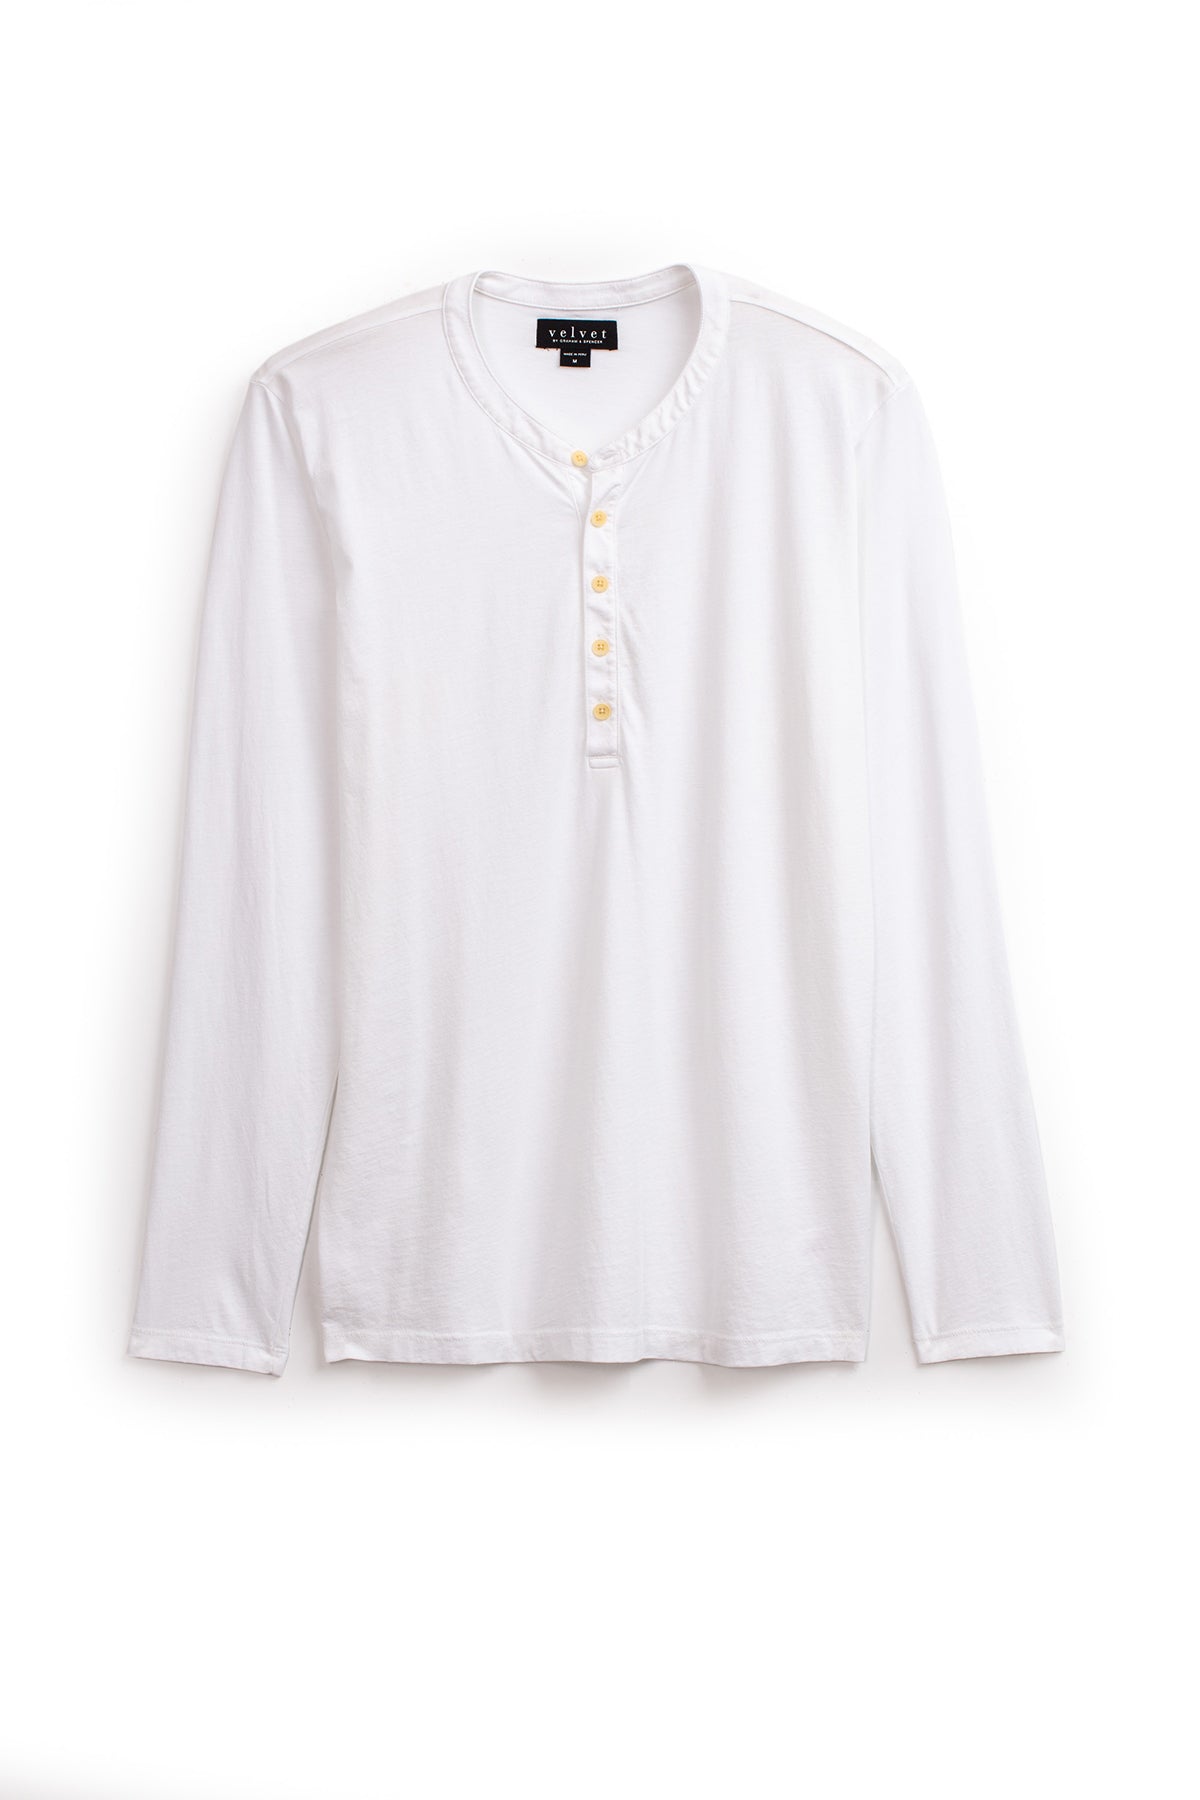   A lightweight, long-sleeve white ALVARO HENLEY by Velvet by Graham & Spencer with a round neckline and four buttons down the front, displayed against a plain white background. 